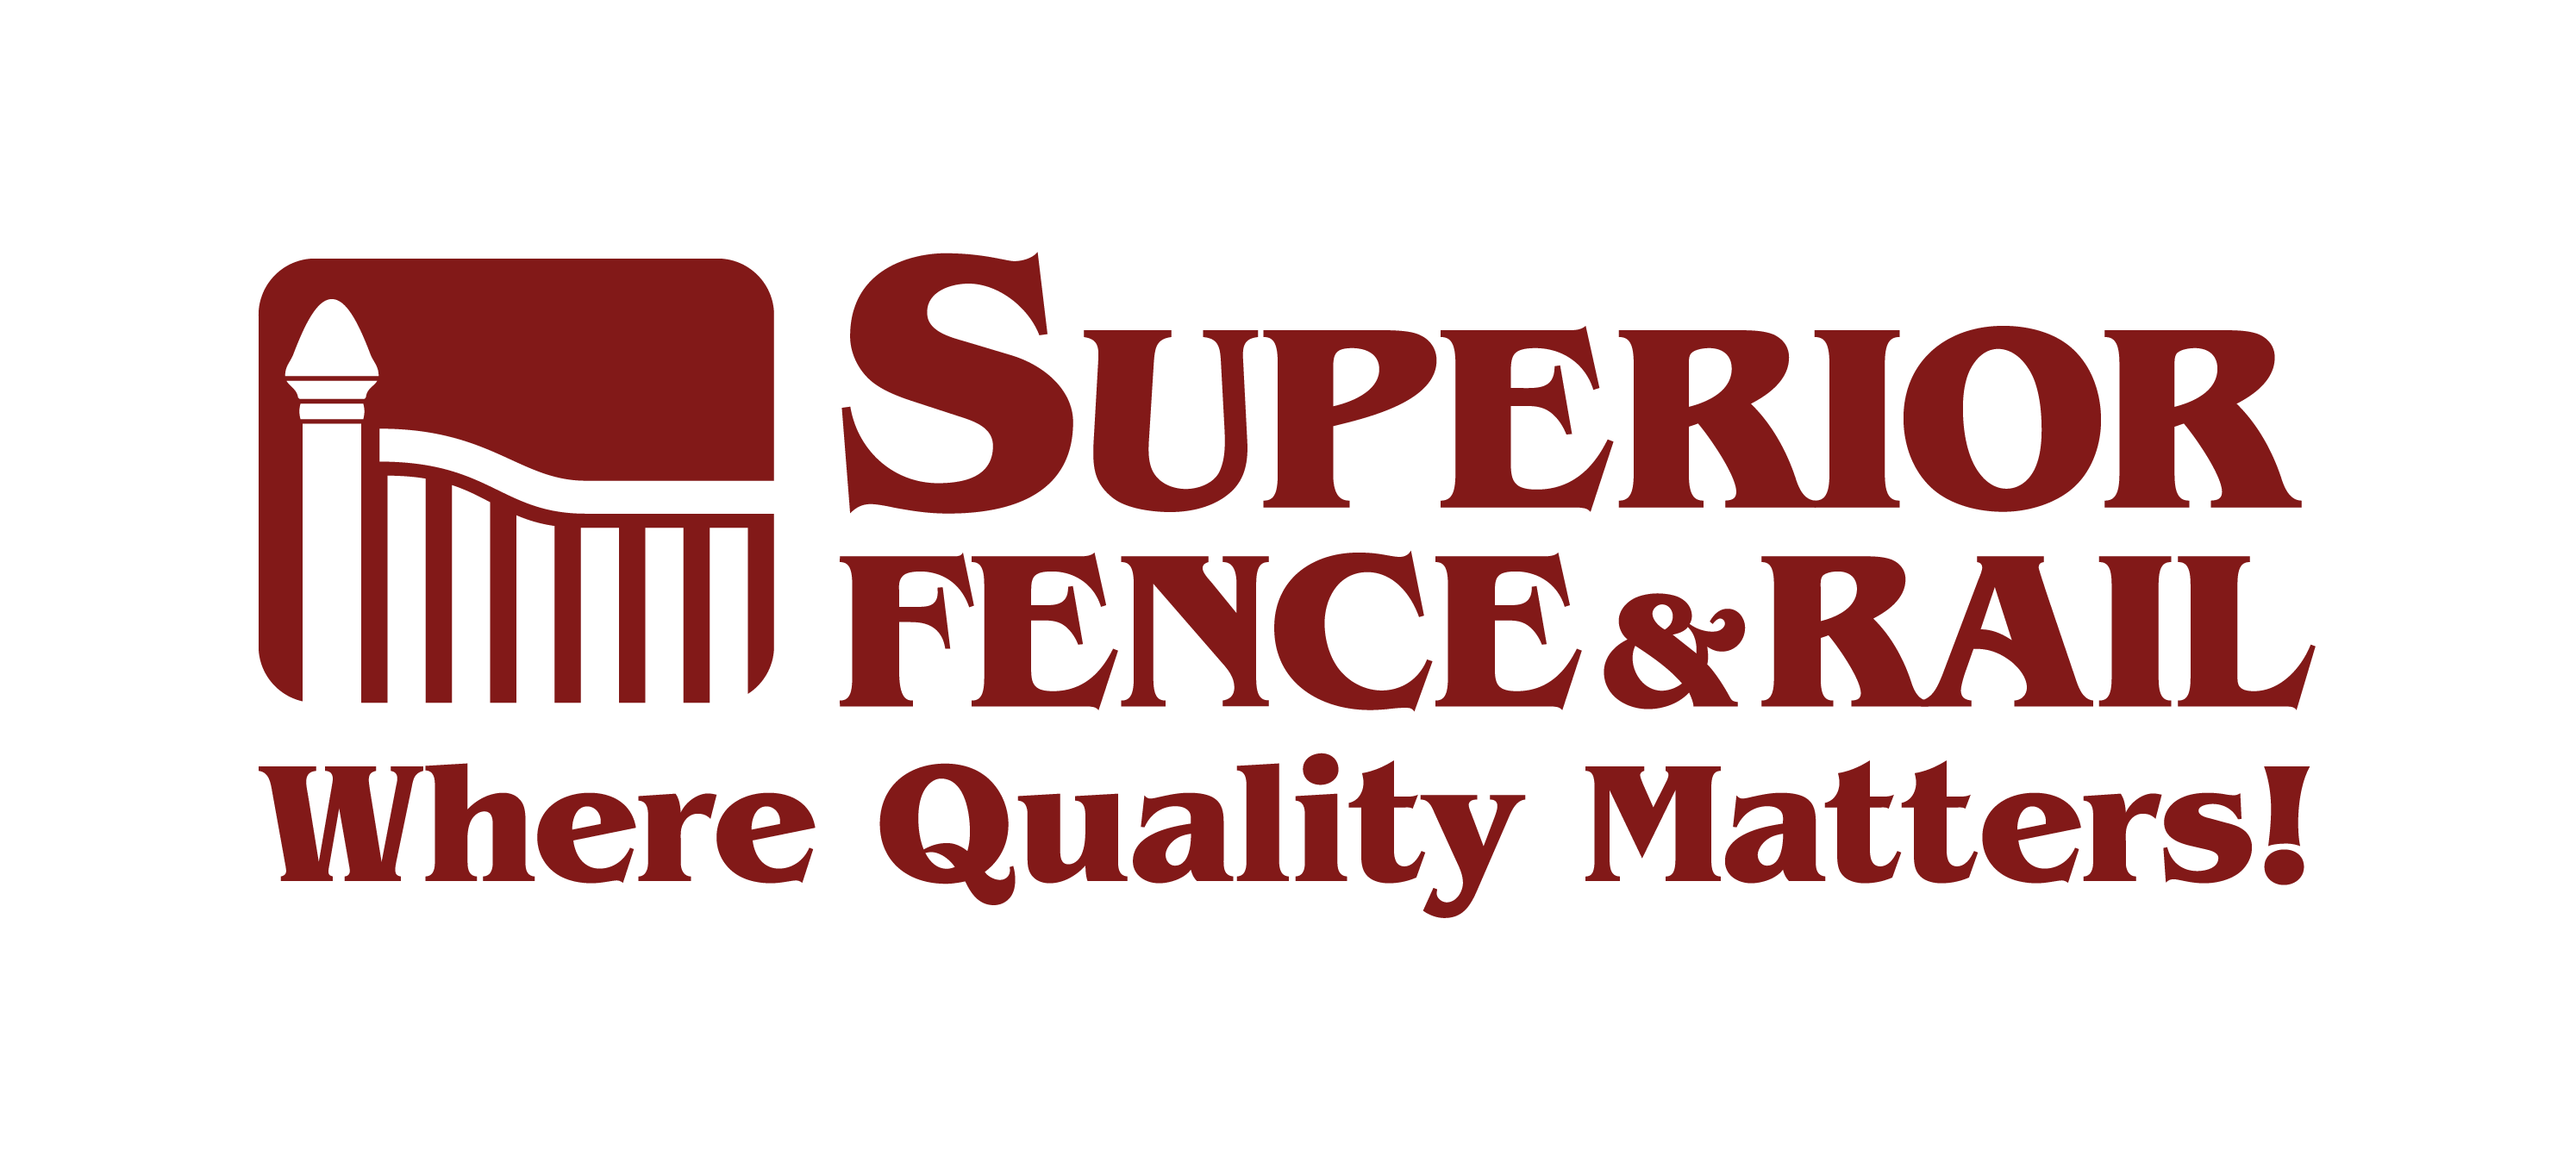 Florida-Based Fence Franchise Continues to Expand in Major Markets Opening Its Third Georgia Location